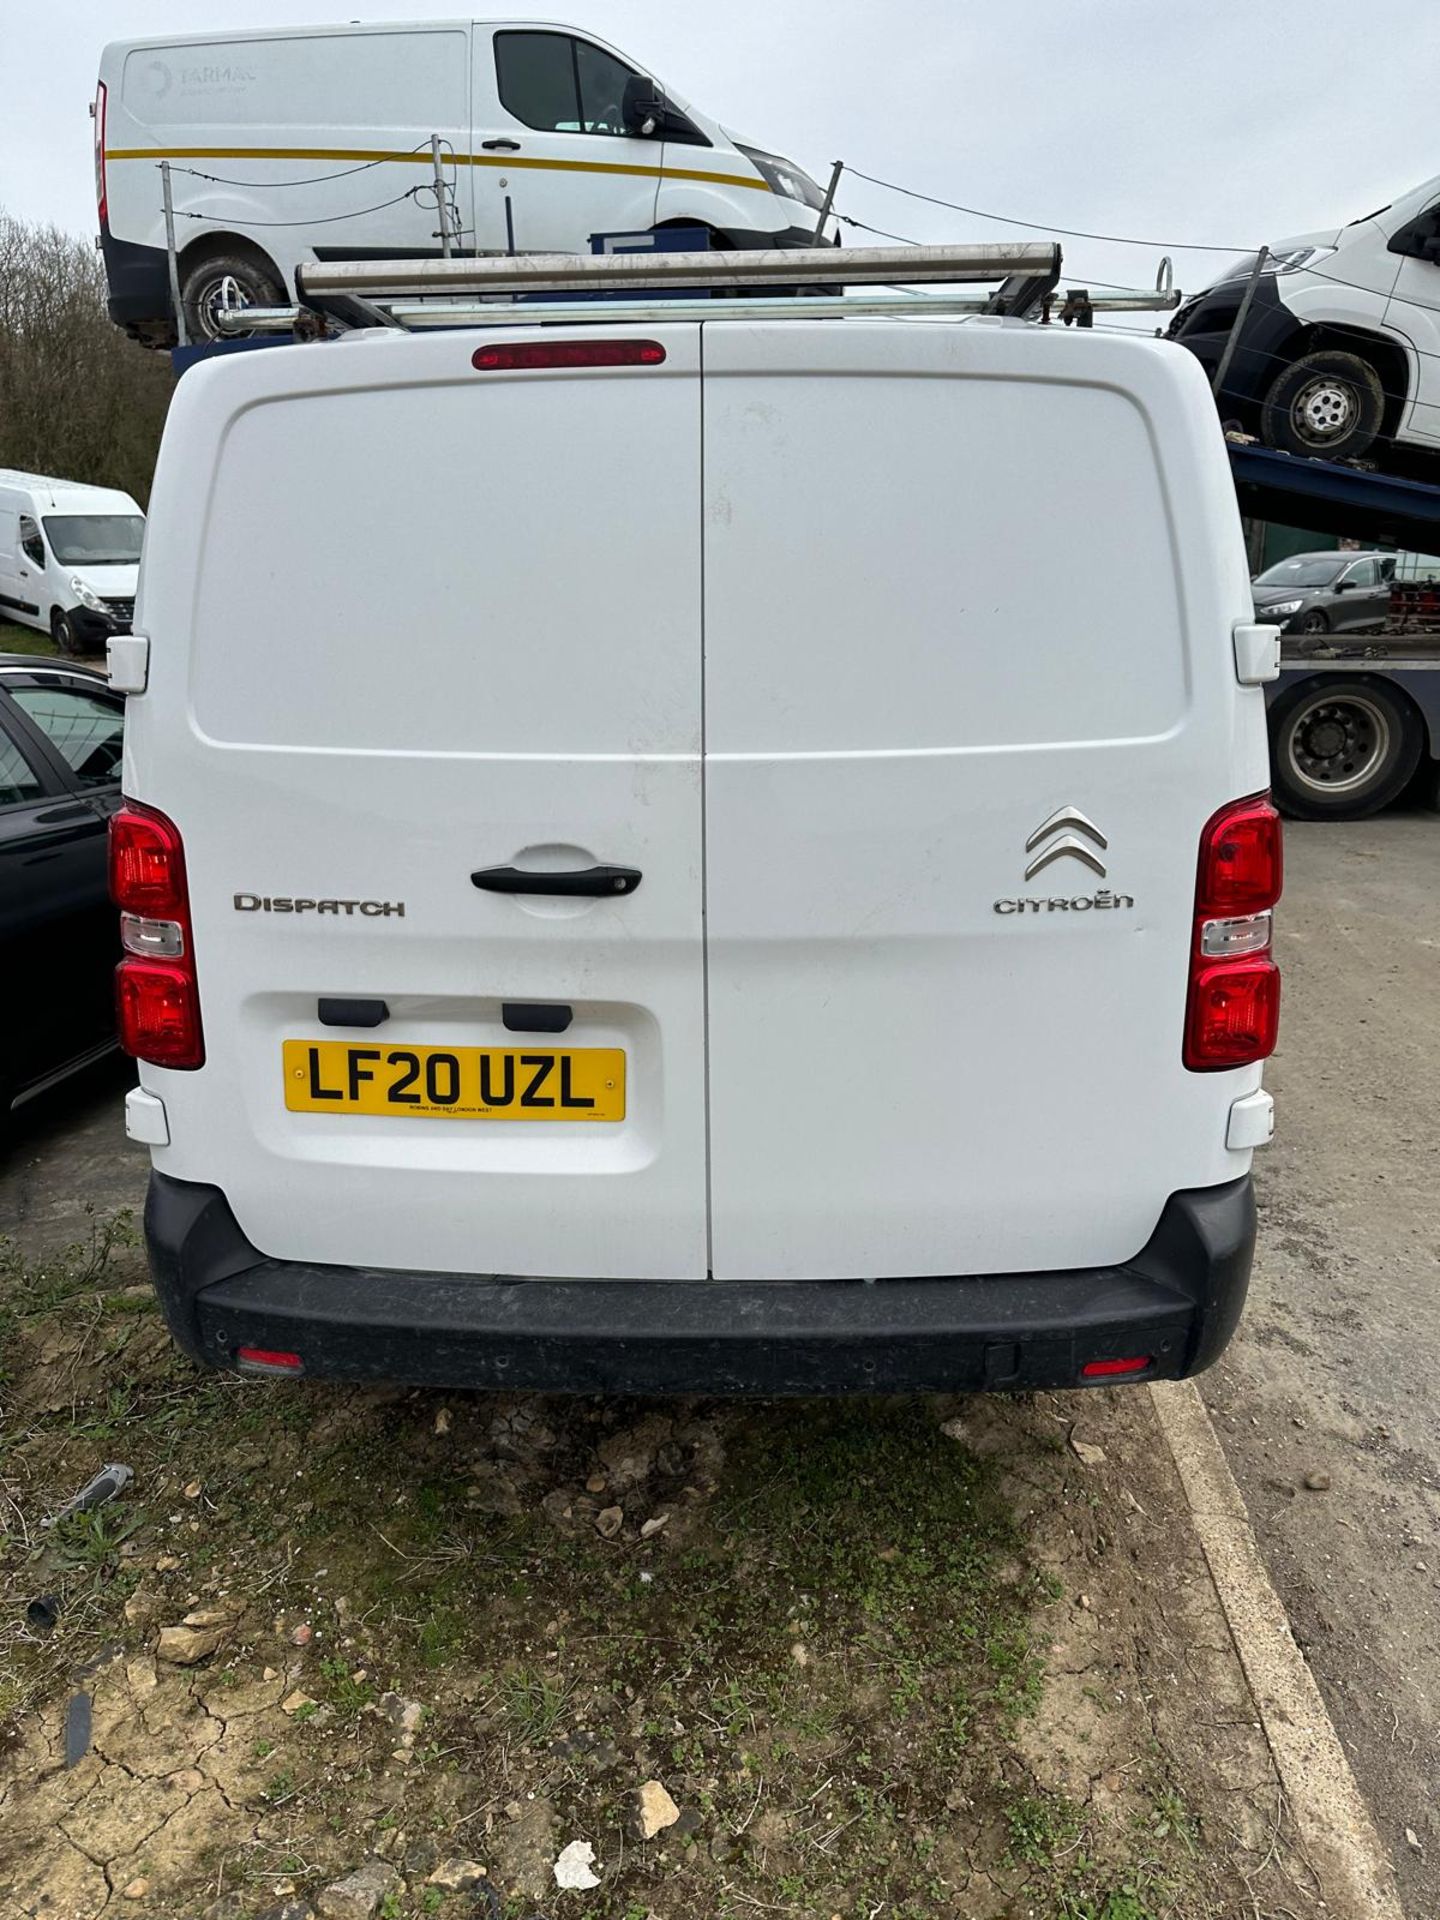 2020 20 CITROEN DISPATCH PANEL VAN - 2.0 6 SPEED - 111K MILES - AIR CON - PLY LINED - EURO 6  - Image 6 of 10